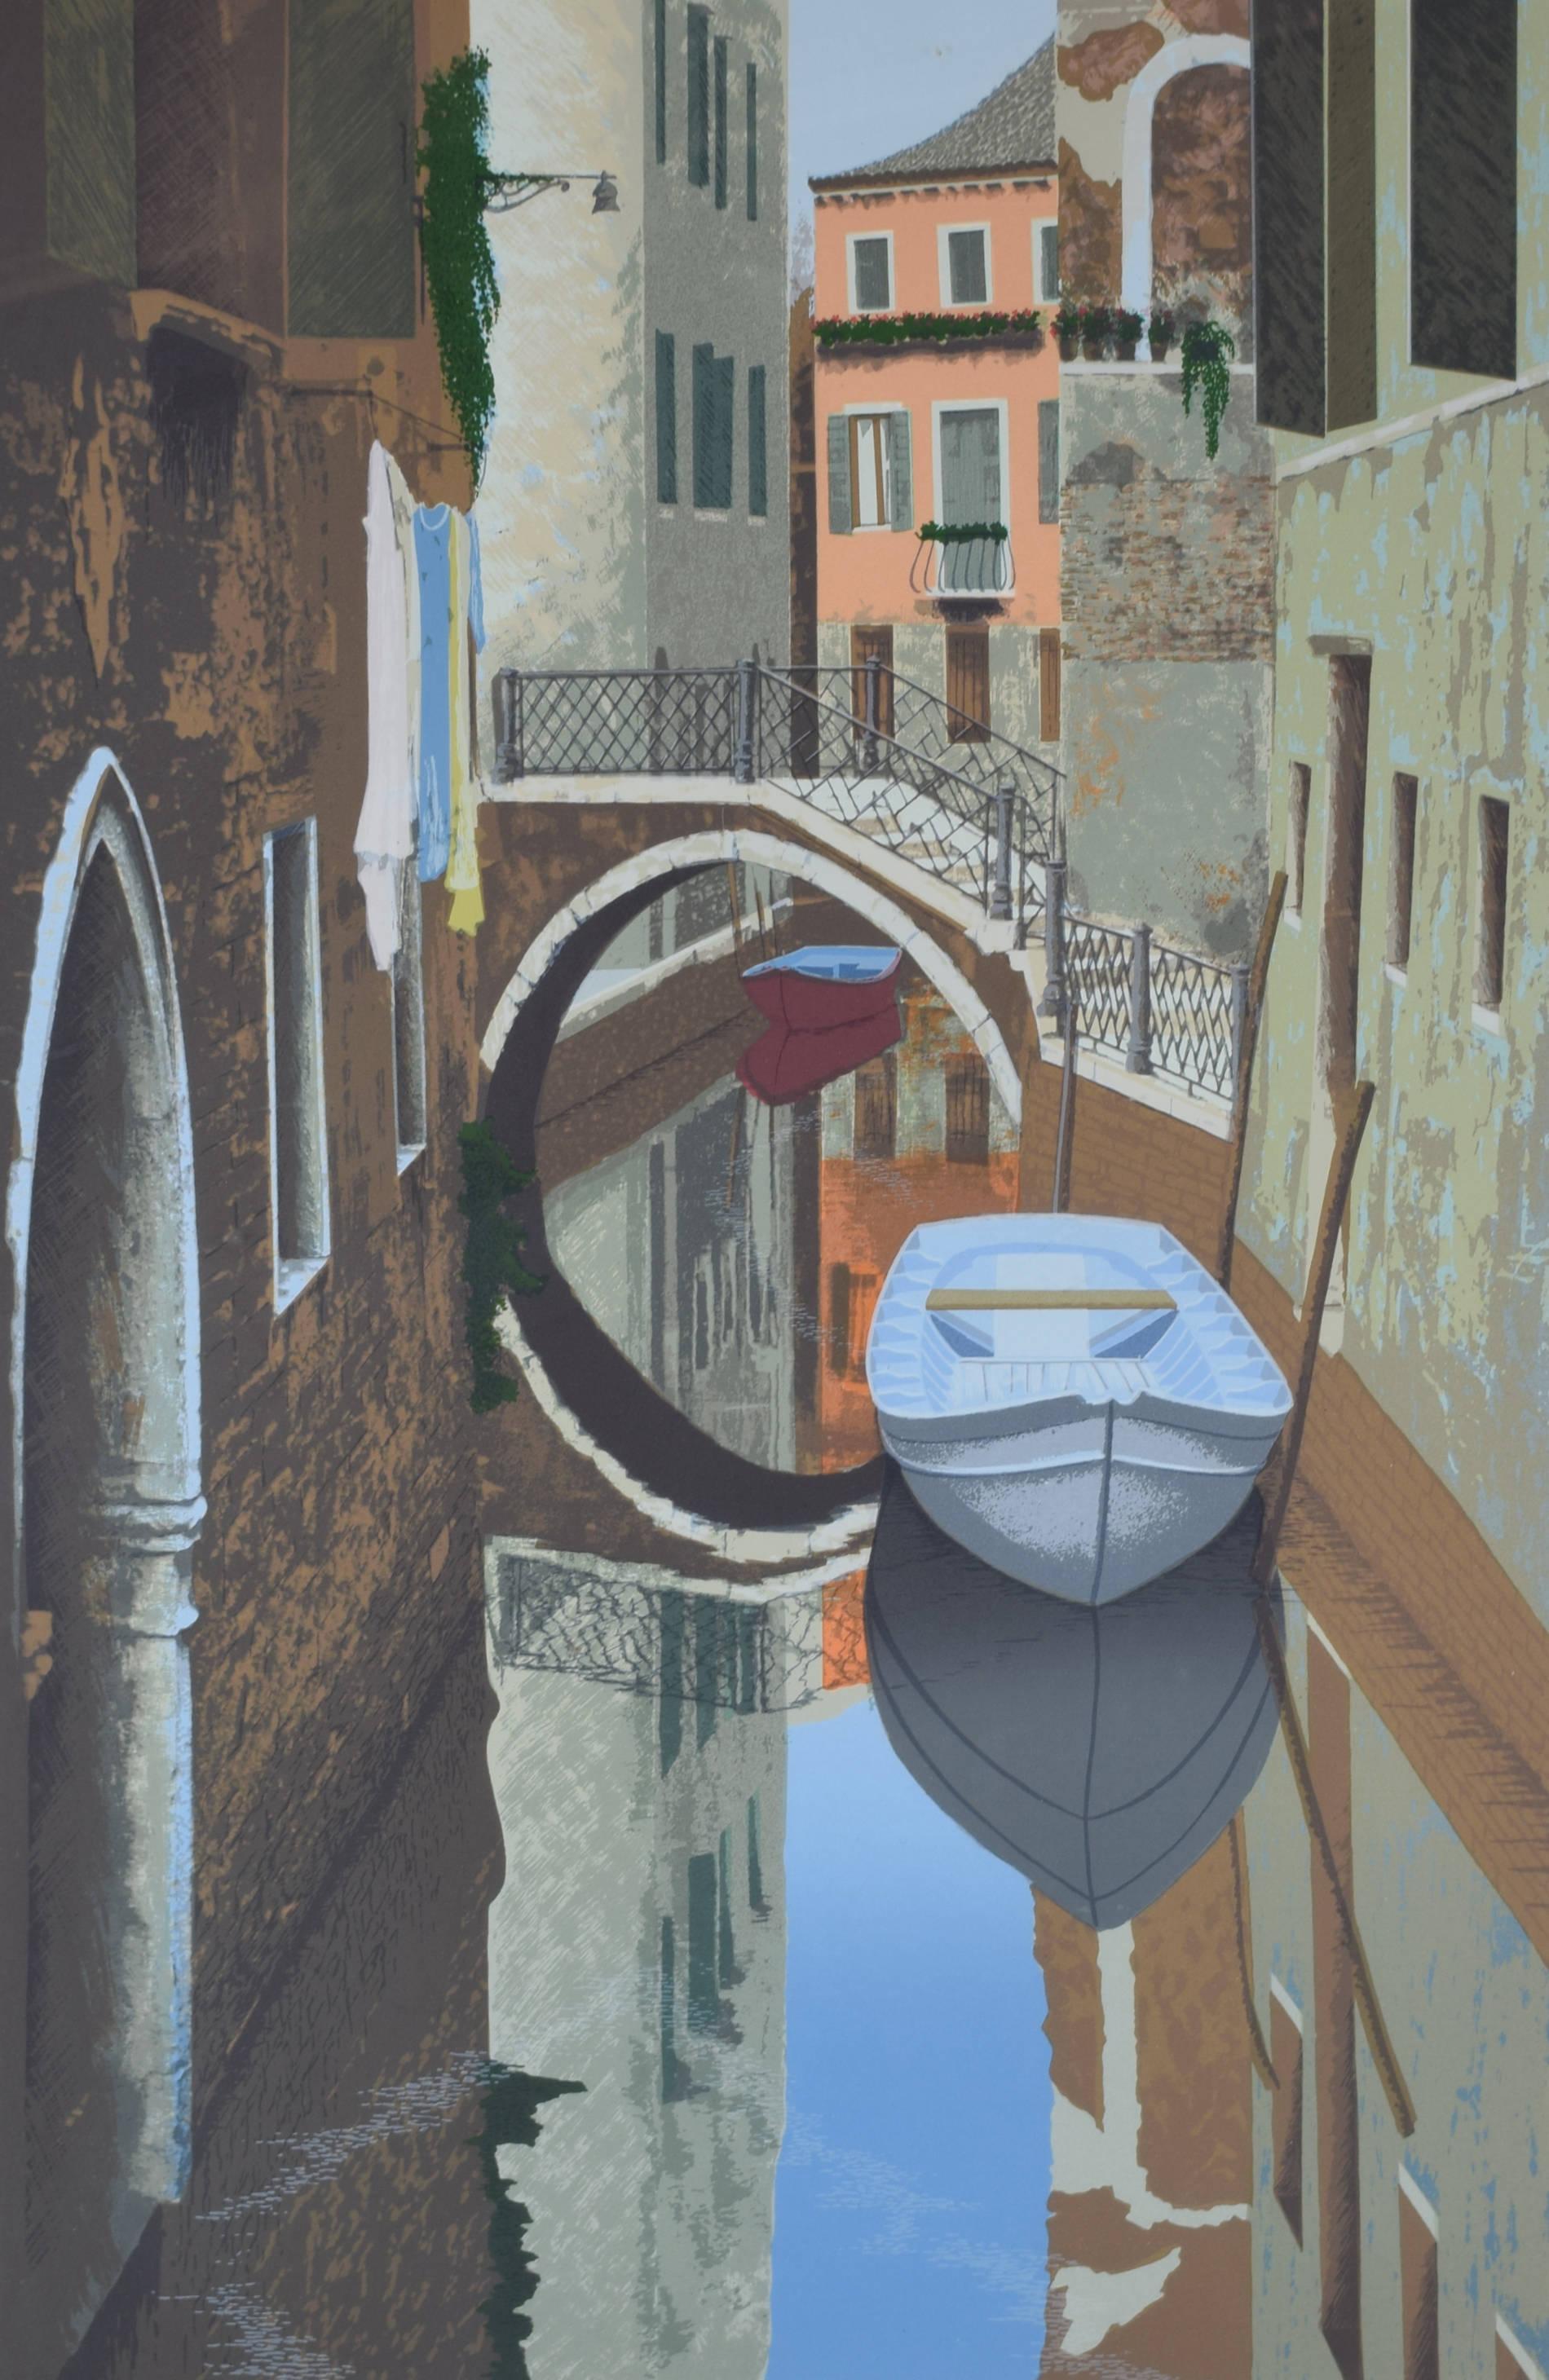 To see more, scroll down to "More from this Seller" and below it click on "See all from this Seller."

Graham Bannister (born 1954)
A Venetian Canal
Screenprint 
76 x 50 cm

A screenprint of one of Venice's canals, crossed by an iron-railed bridge.